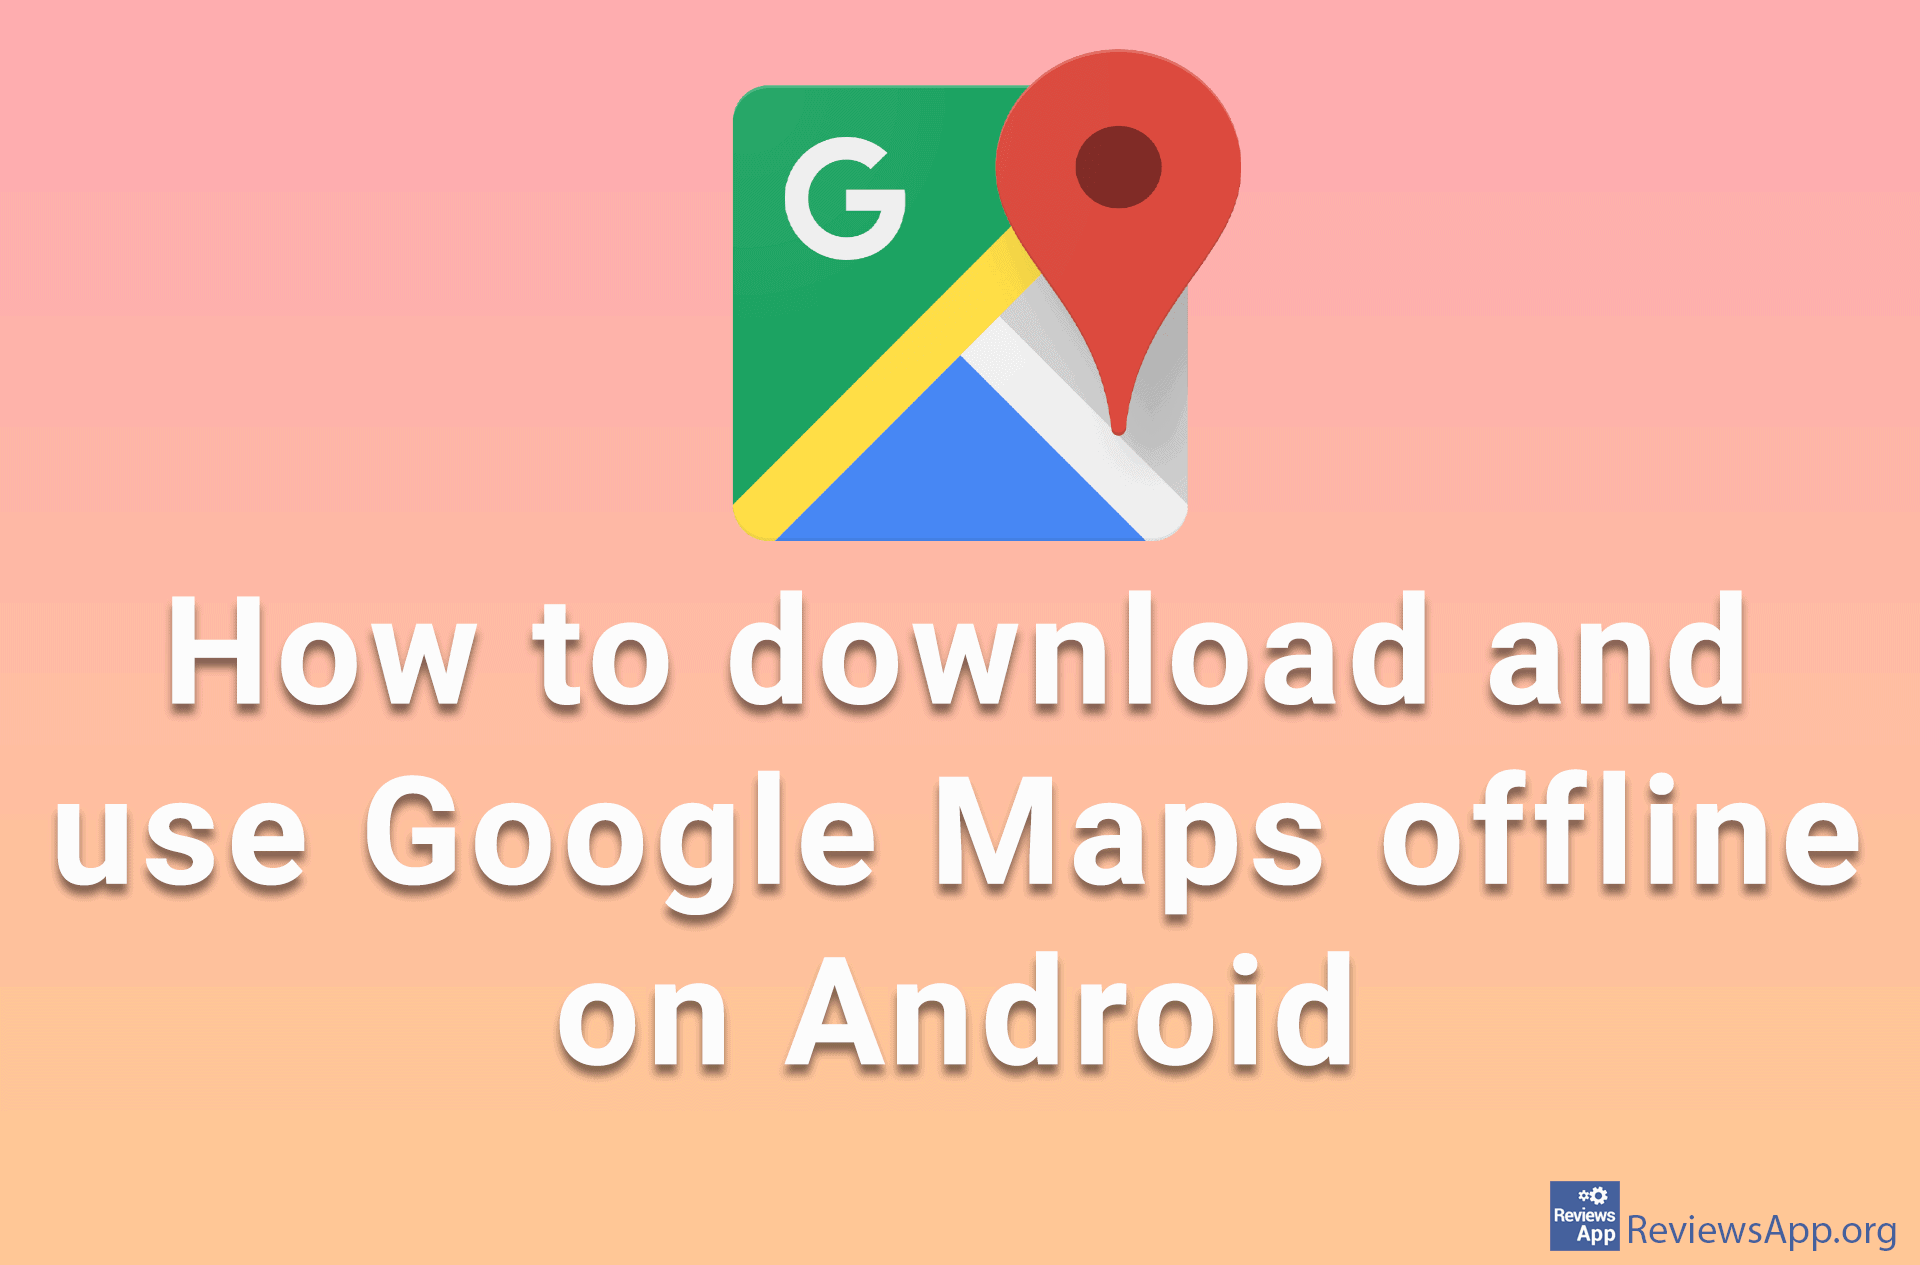 How to download and use Google Maps offline on Android